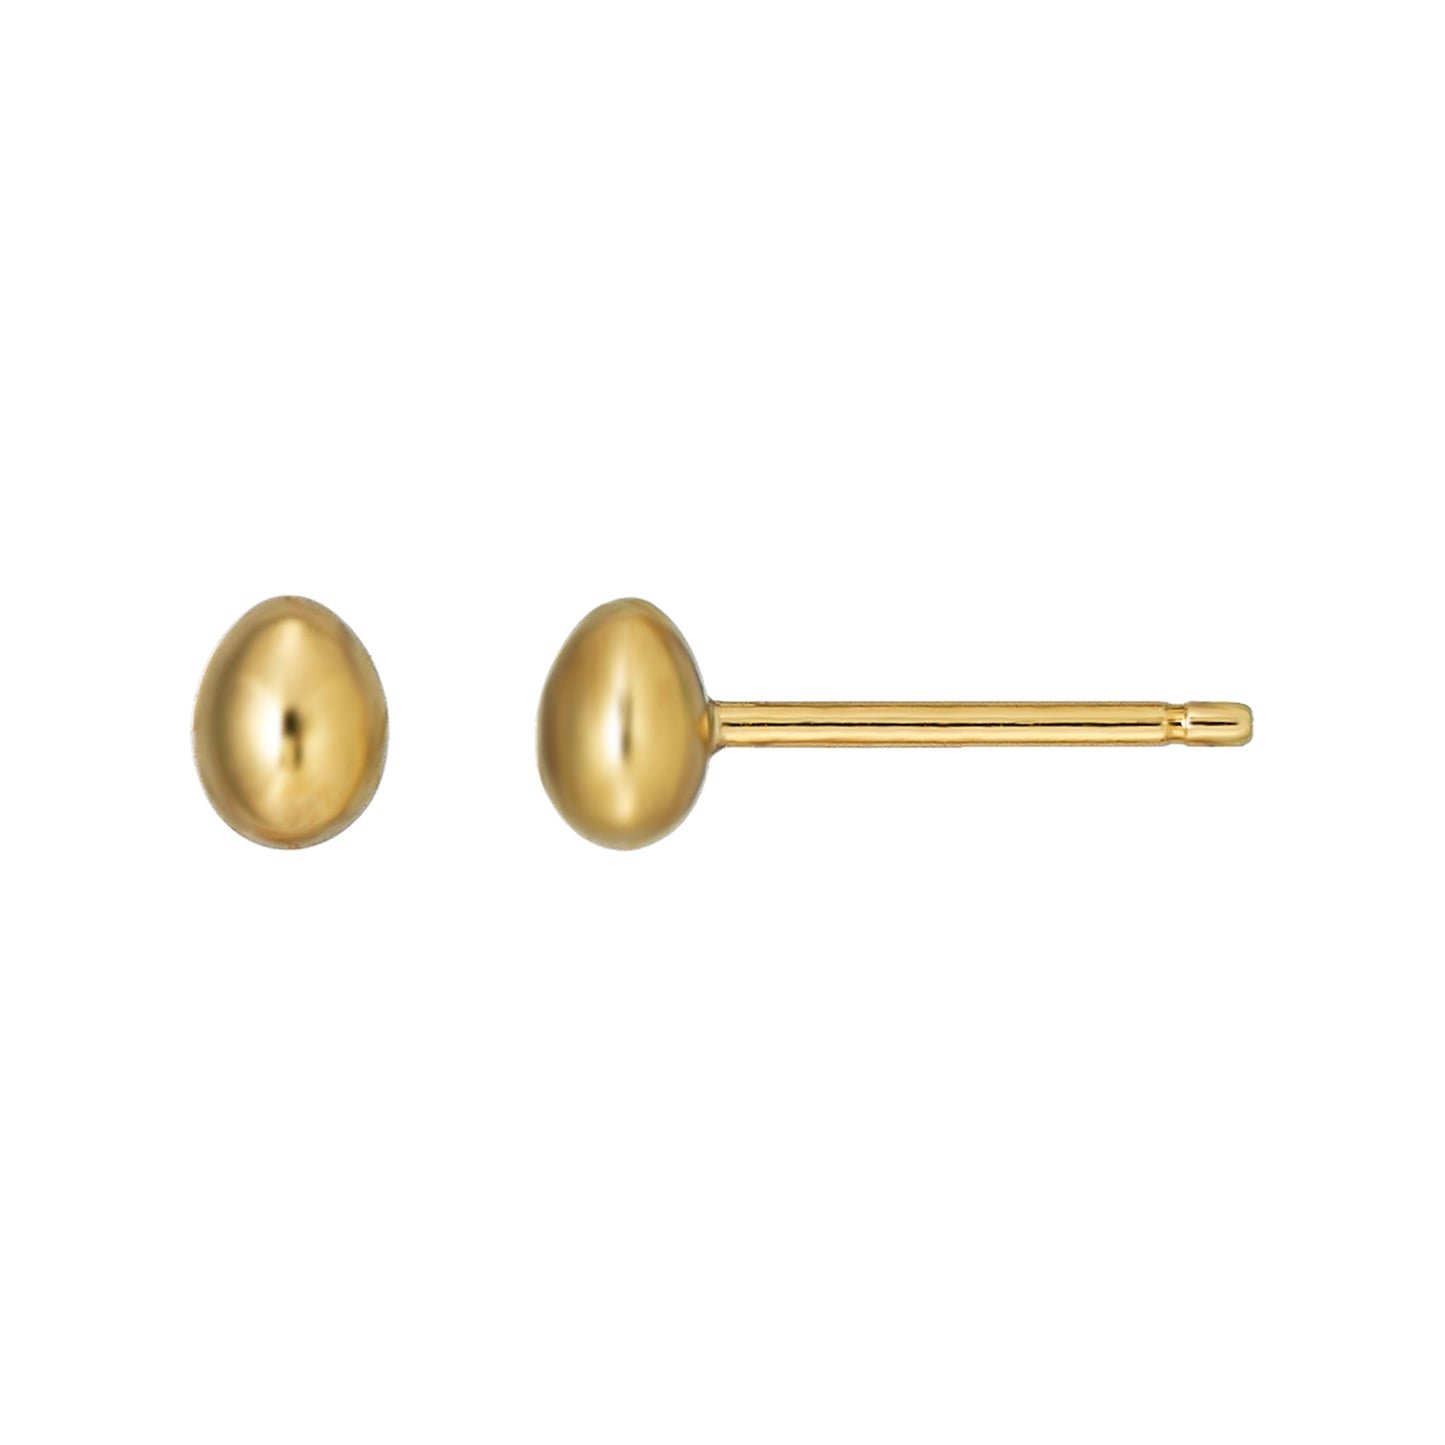 [Second Earrings] 18K Yellow Gold Egg Earrings - Product Image